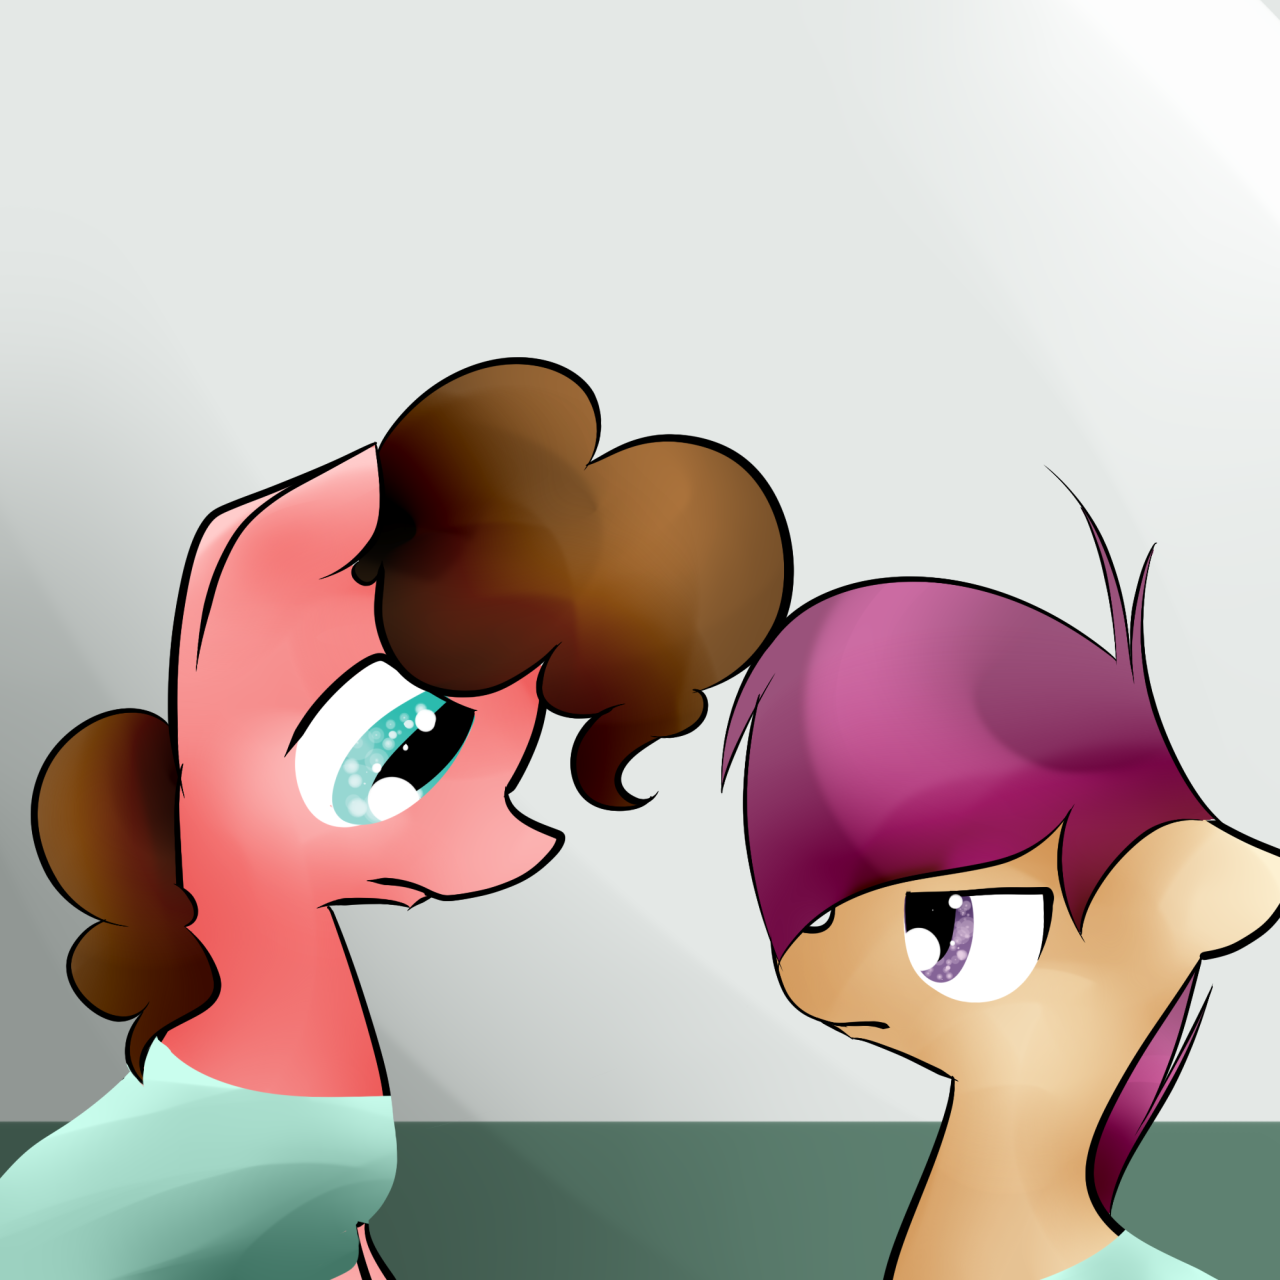 patientscootaloo:  If it’ll make you happy, I’ll eat a “banan.” I’ll try